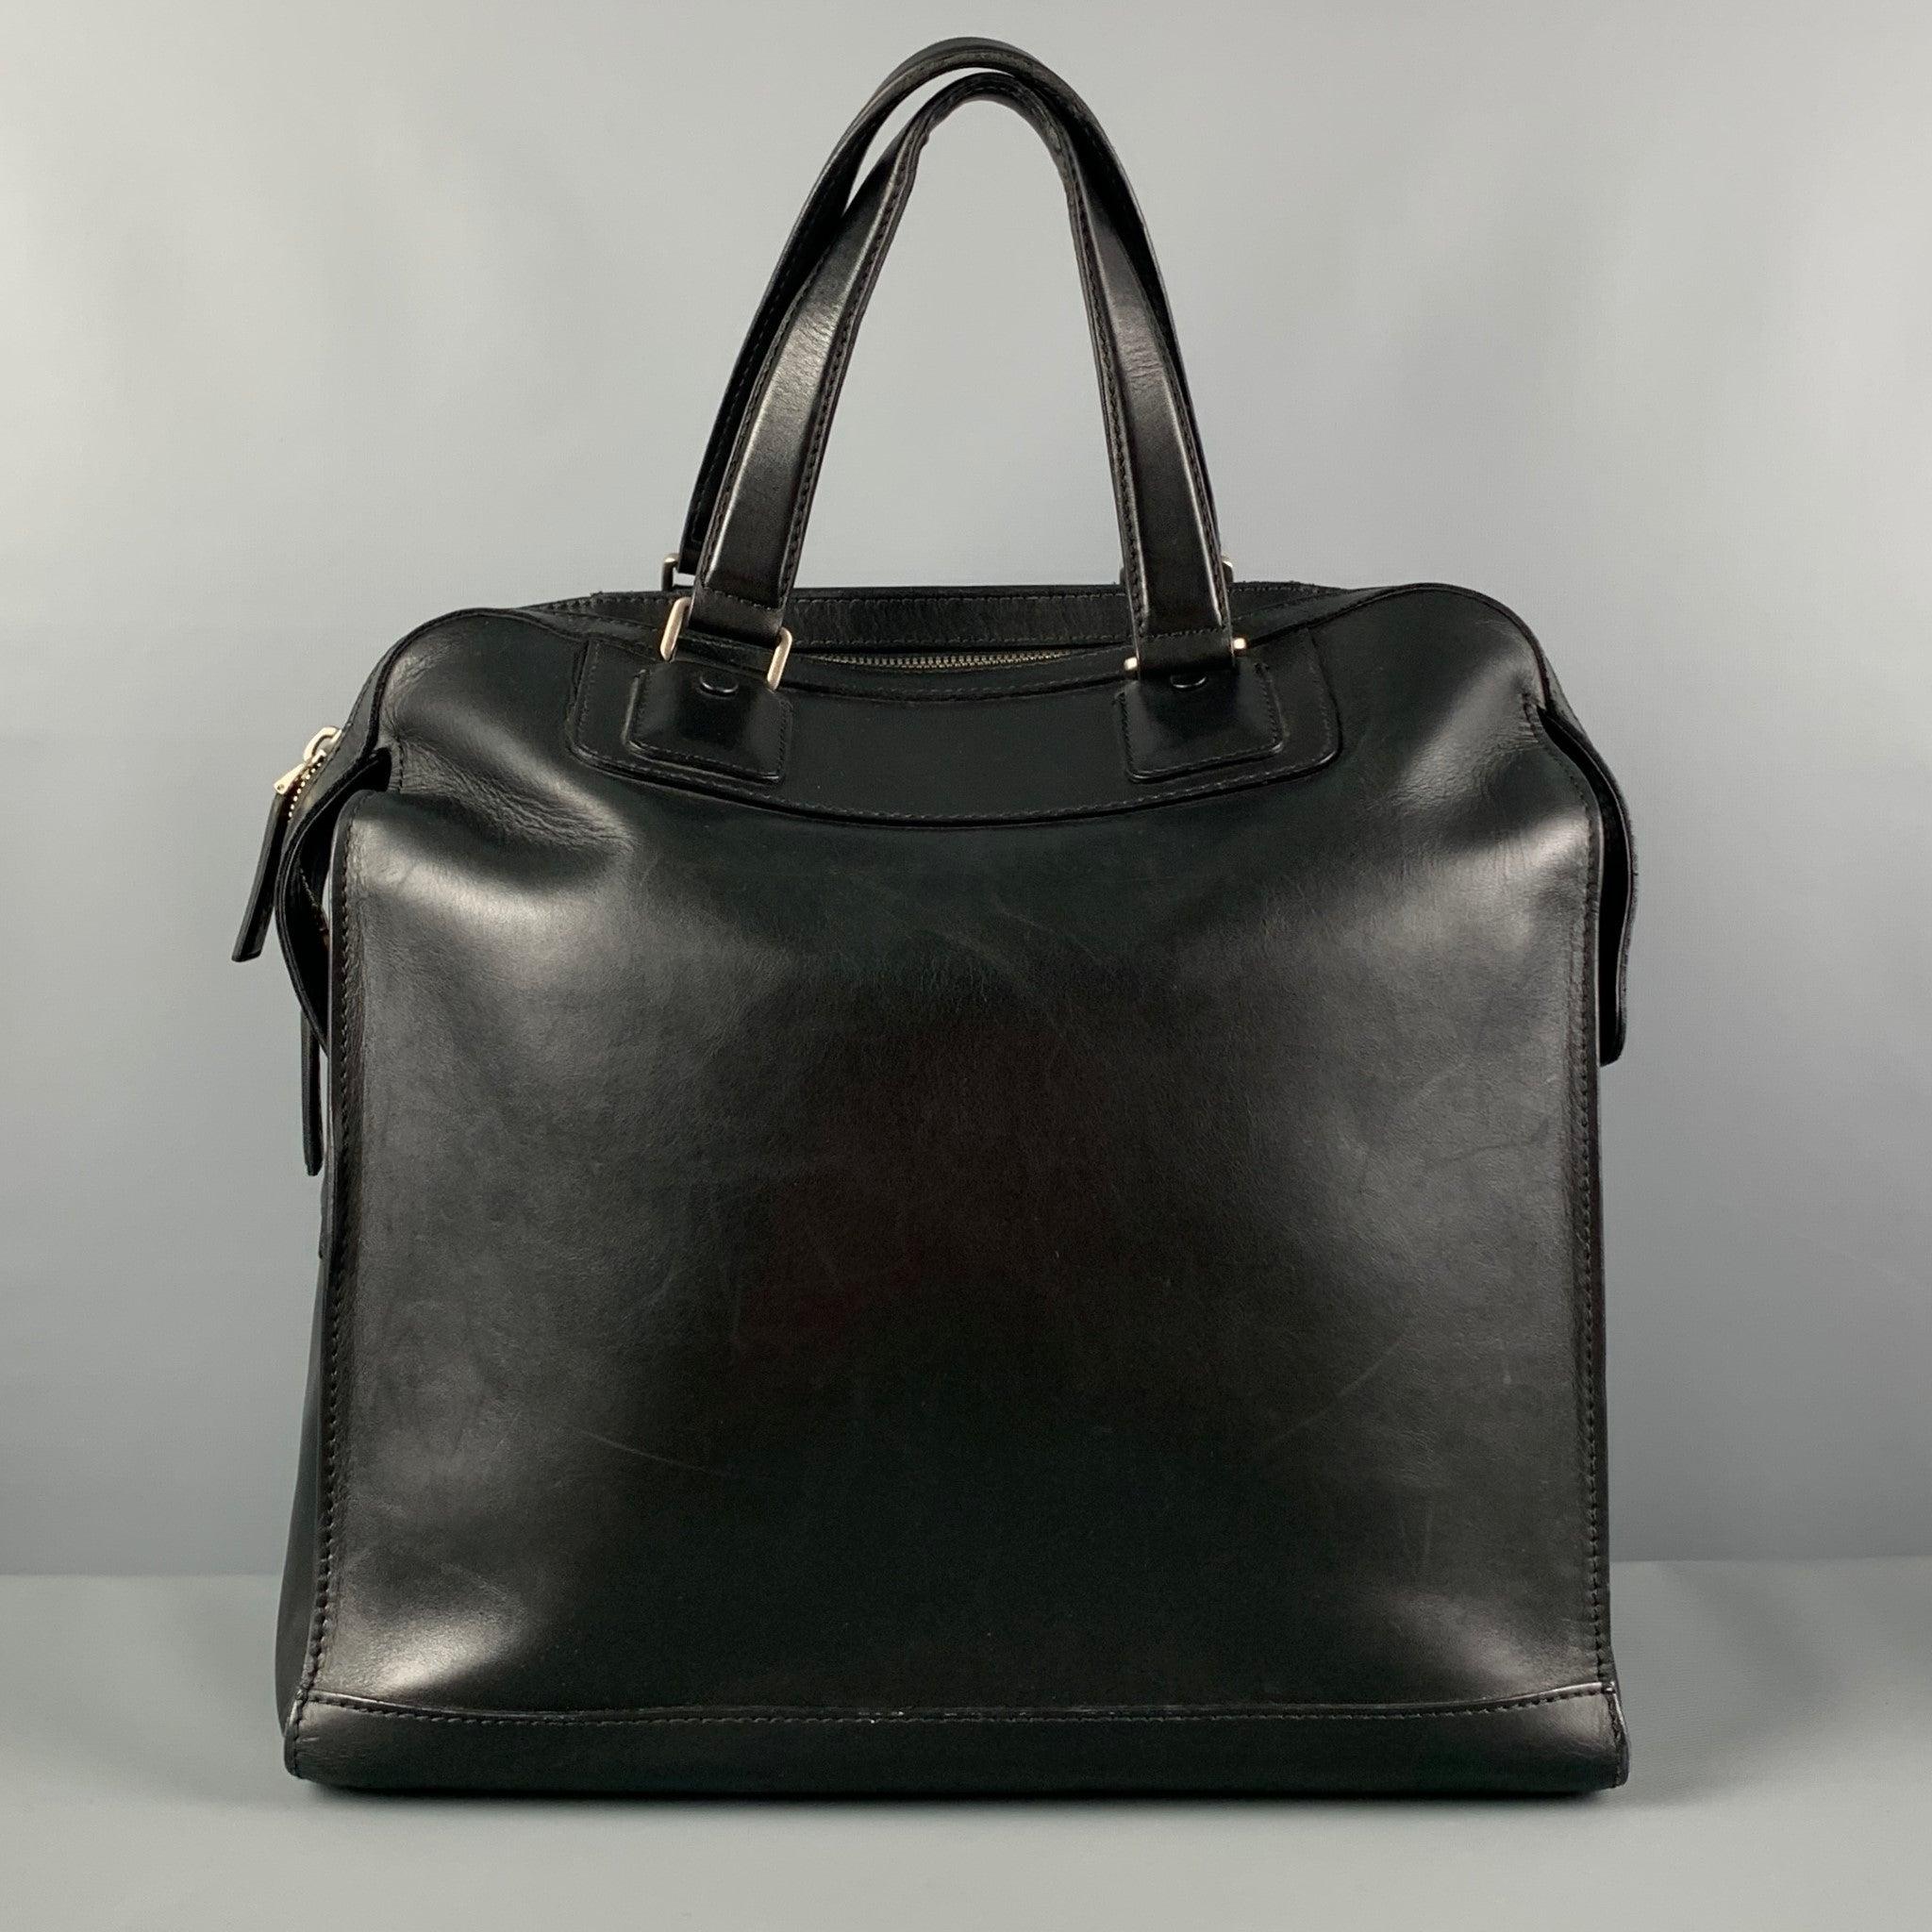 BALLY Black Leather Top Handles Tote Bag For Sale 1